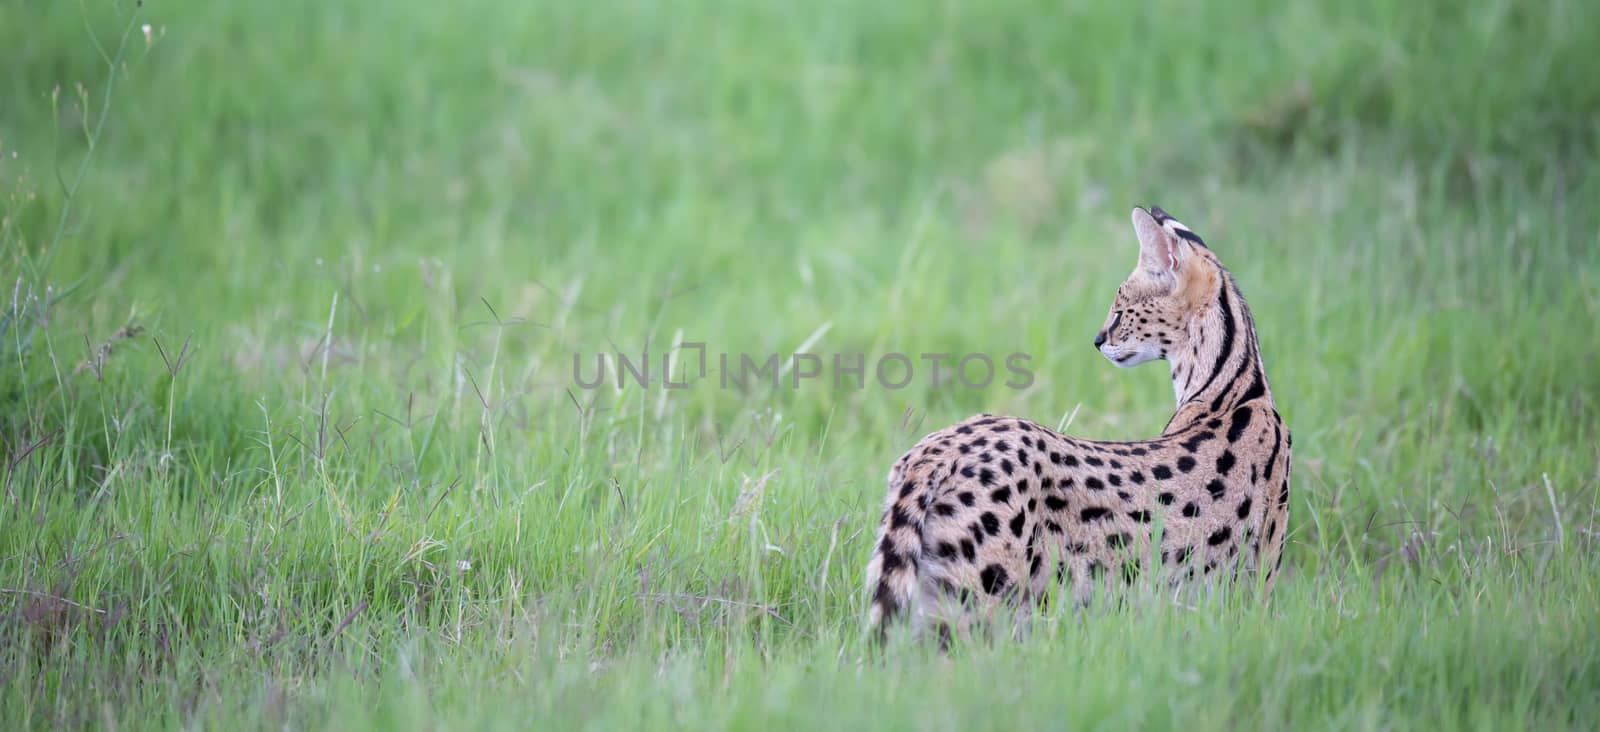 A serval cat in the grassland of the savannah in Kenya